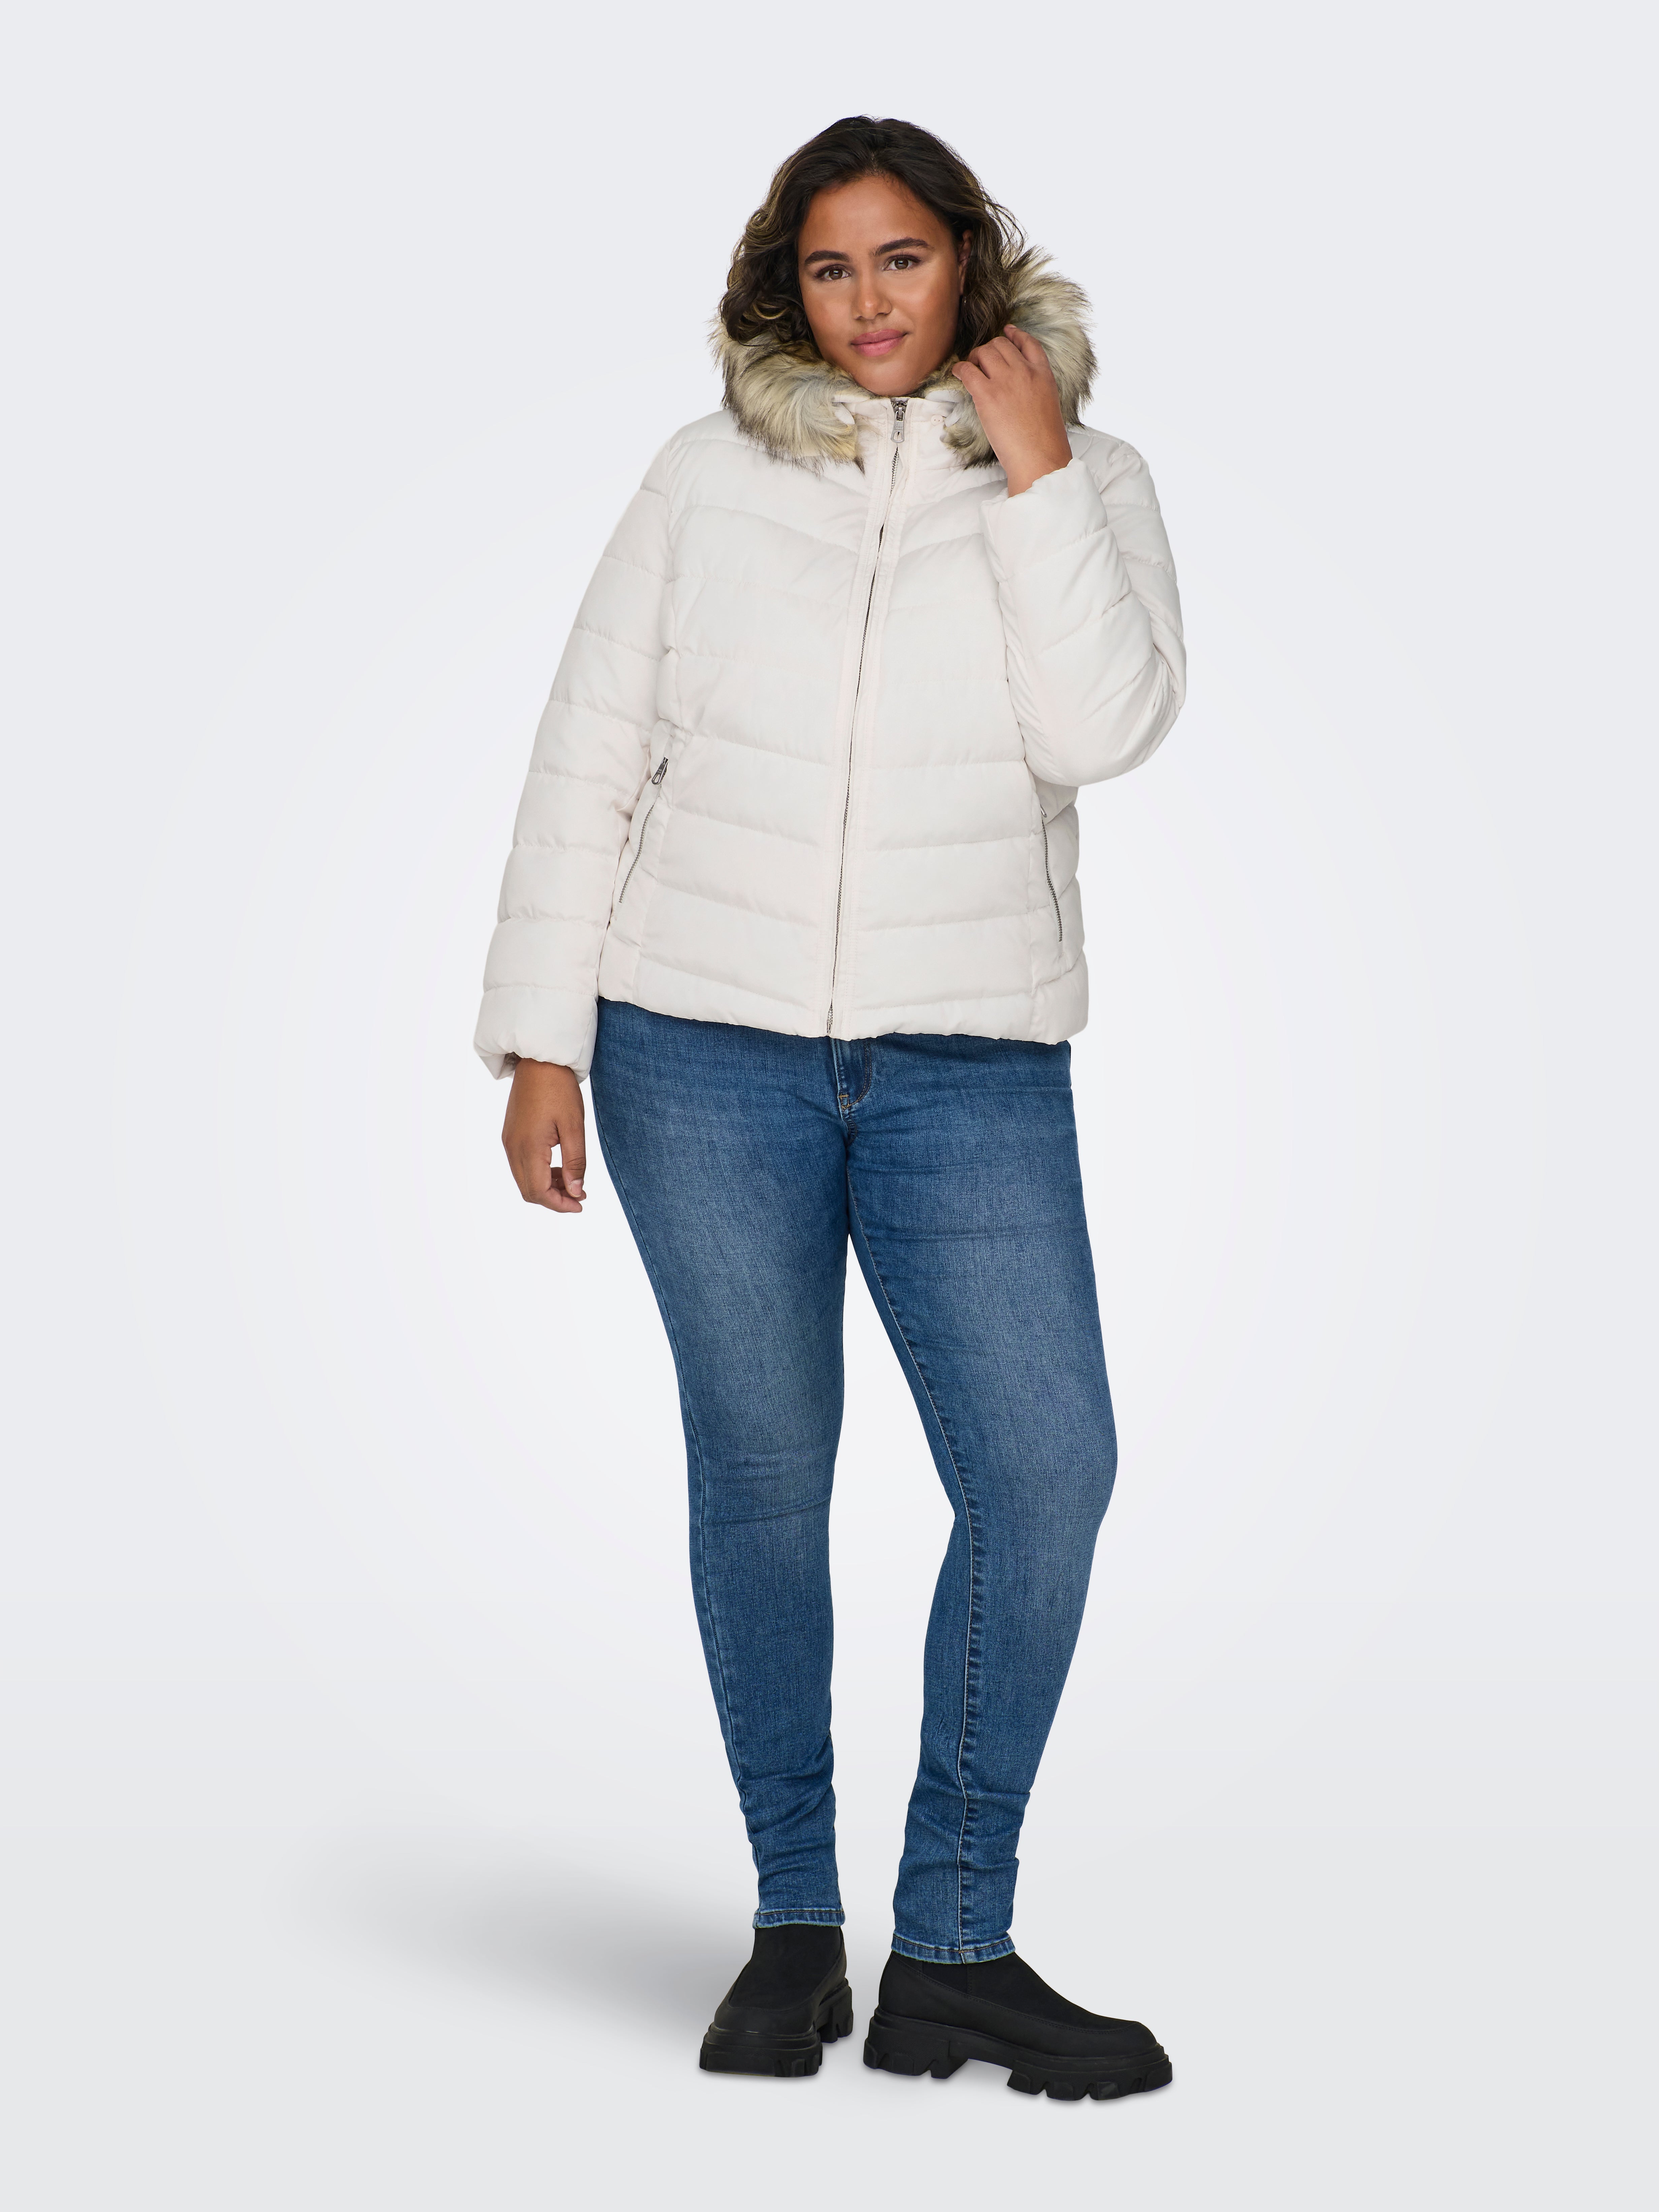 Women > Faux Fur Hoods and Hoodies > Faux Fur Hoods - Faux Fur Throws,  Fabric and Fashion